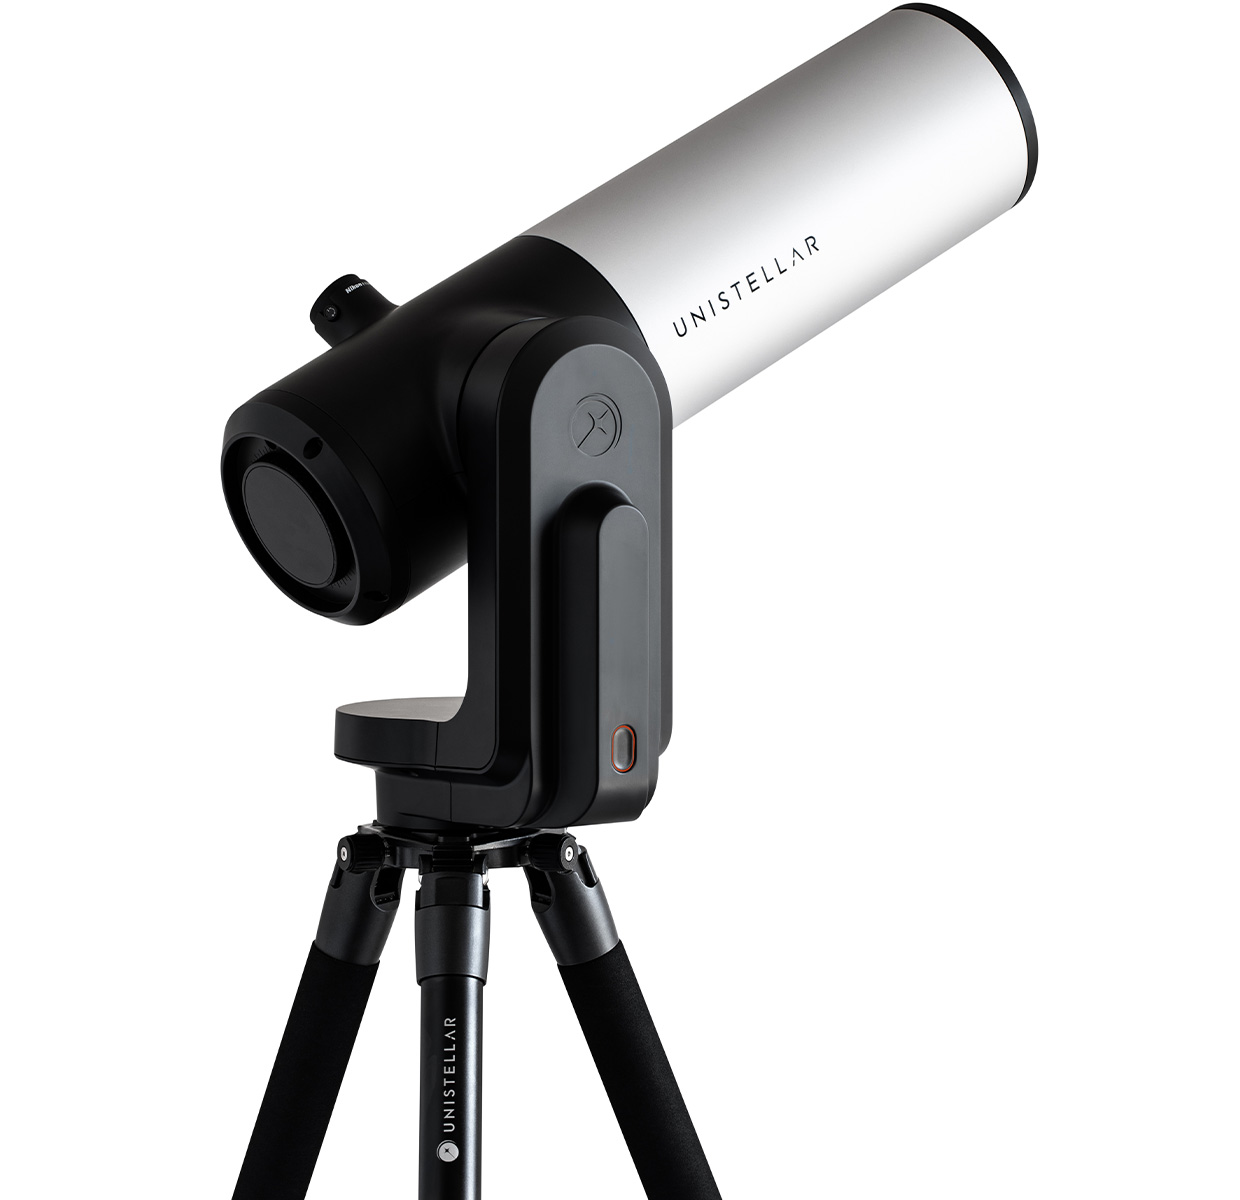 Nikon | News | The digital astronomical telescope eVscope 2, created by  combining the technologies of Nikon and Unistellar